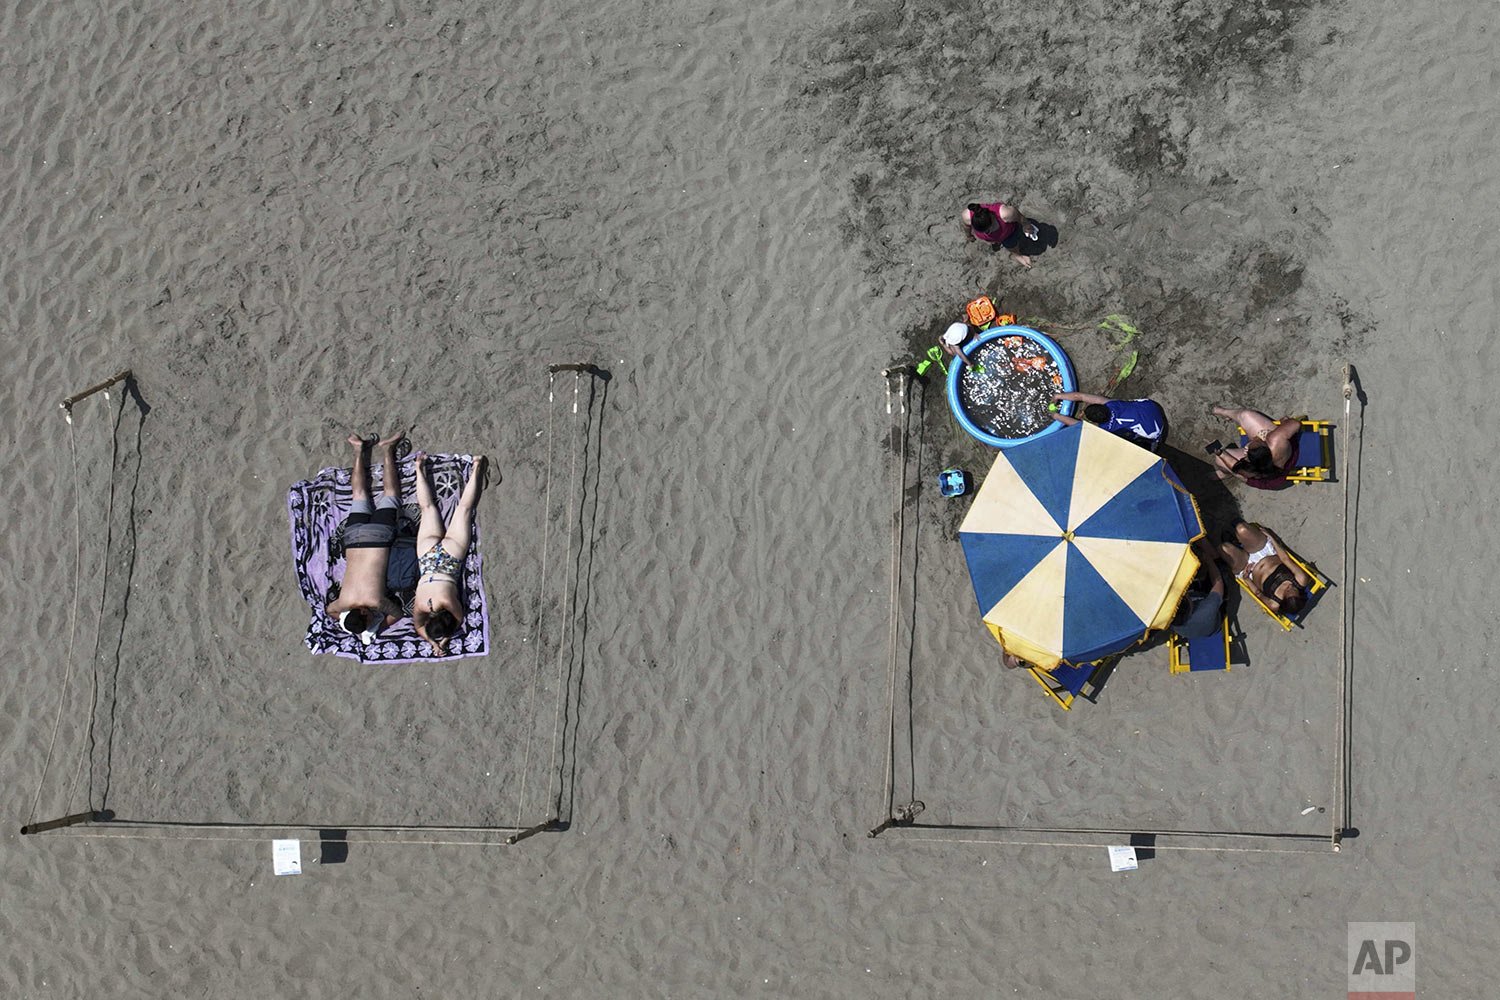  People spend time on Agua Dulce beach in Lima, Peru, Dec. 30, 2021. The Peruvian government announced the closing of beaches for Dec. 31 - Jan. 1 as a measure to help prevent the spread of COVID-19. (AP Photo/Guadalupe Pardo) 